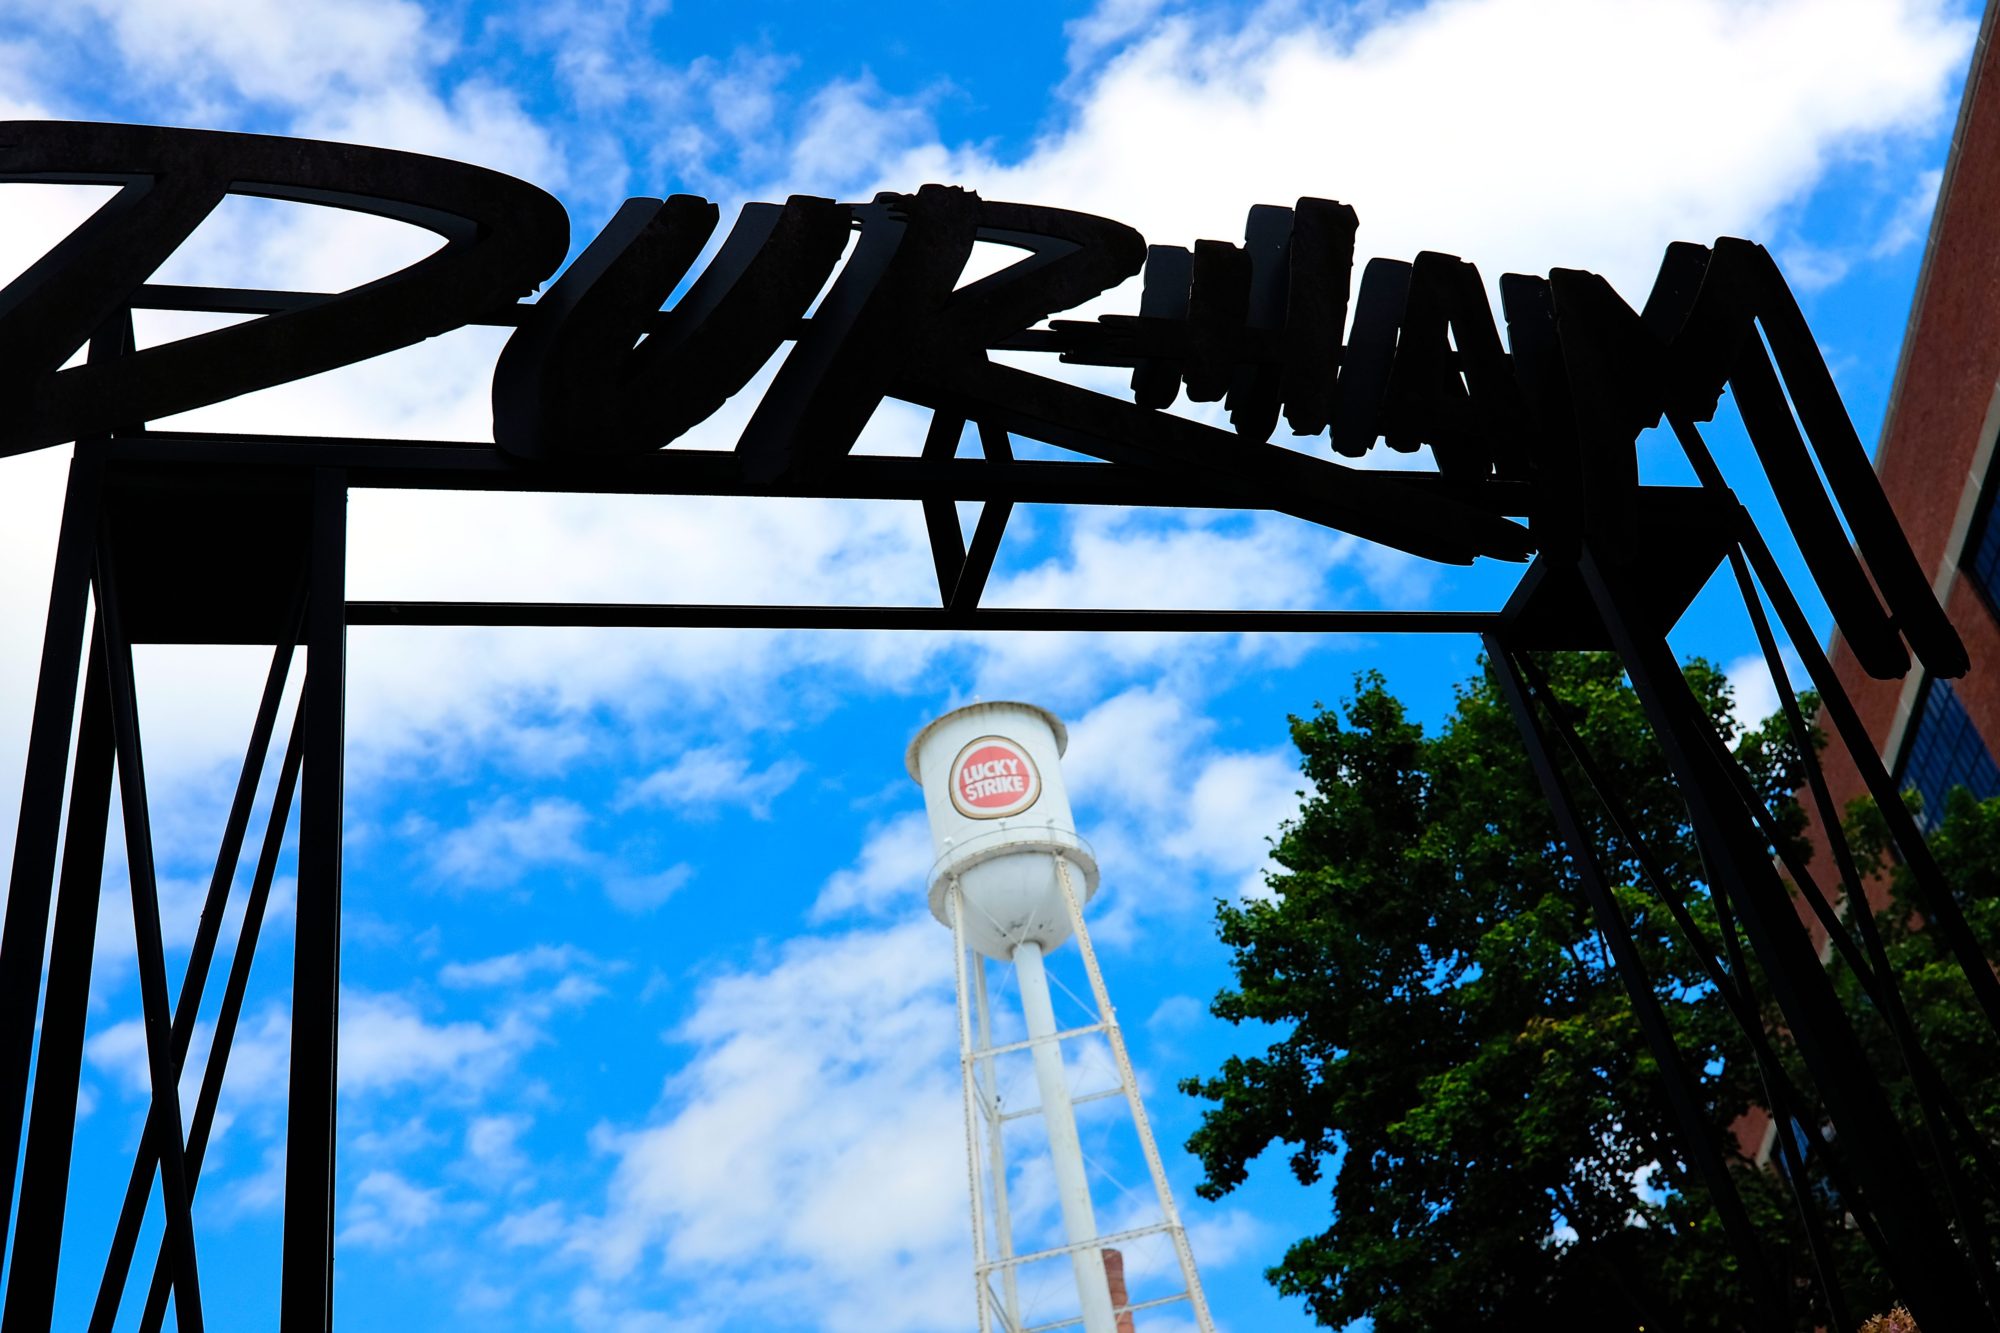 The Lucky Strike water tower is visible beneath a DURHAM sign